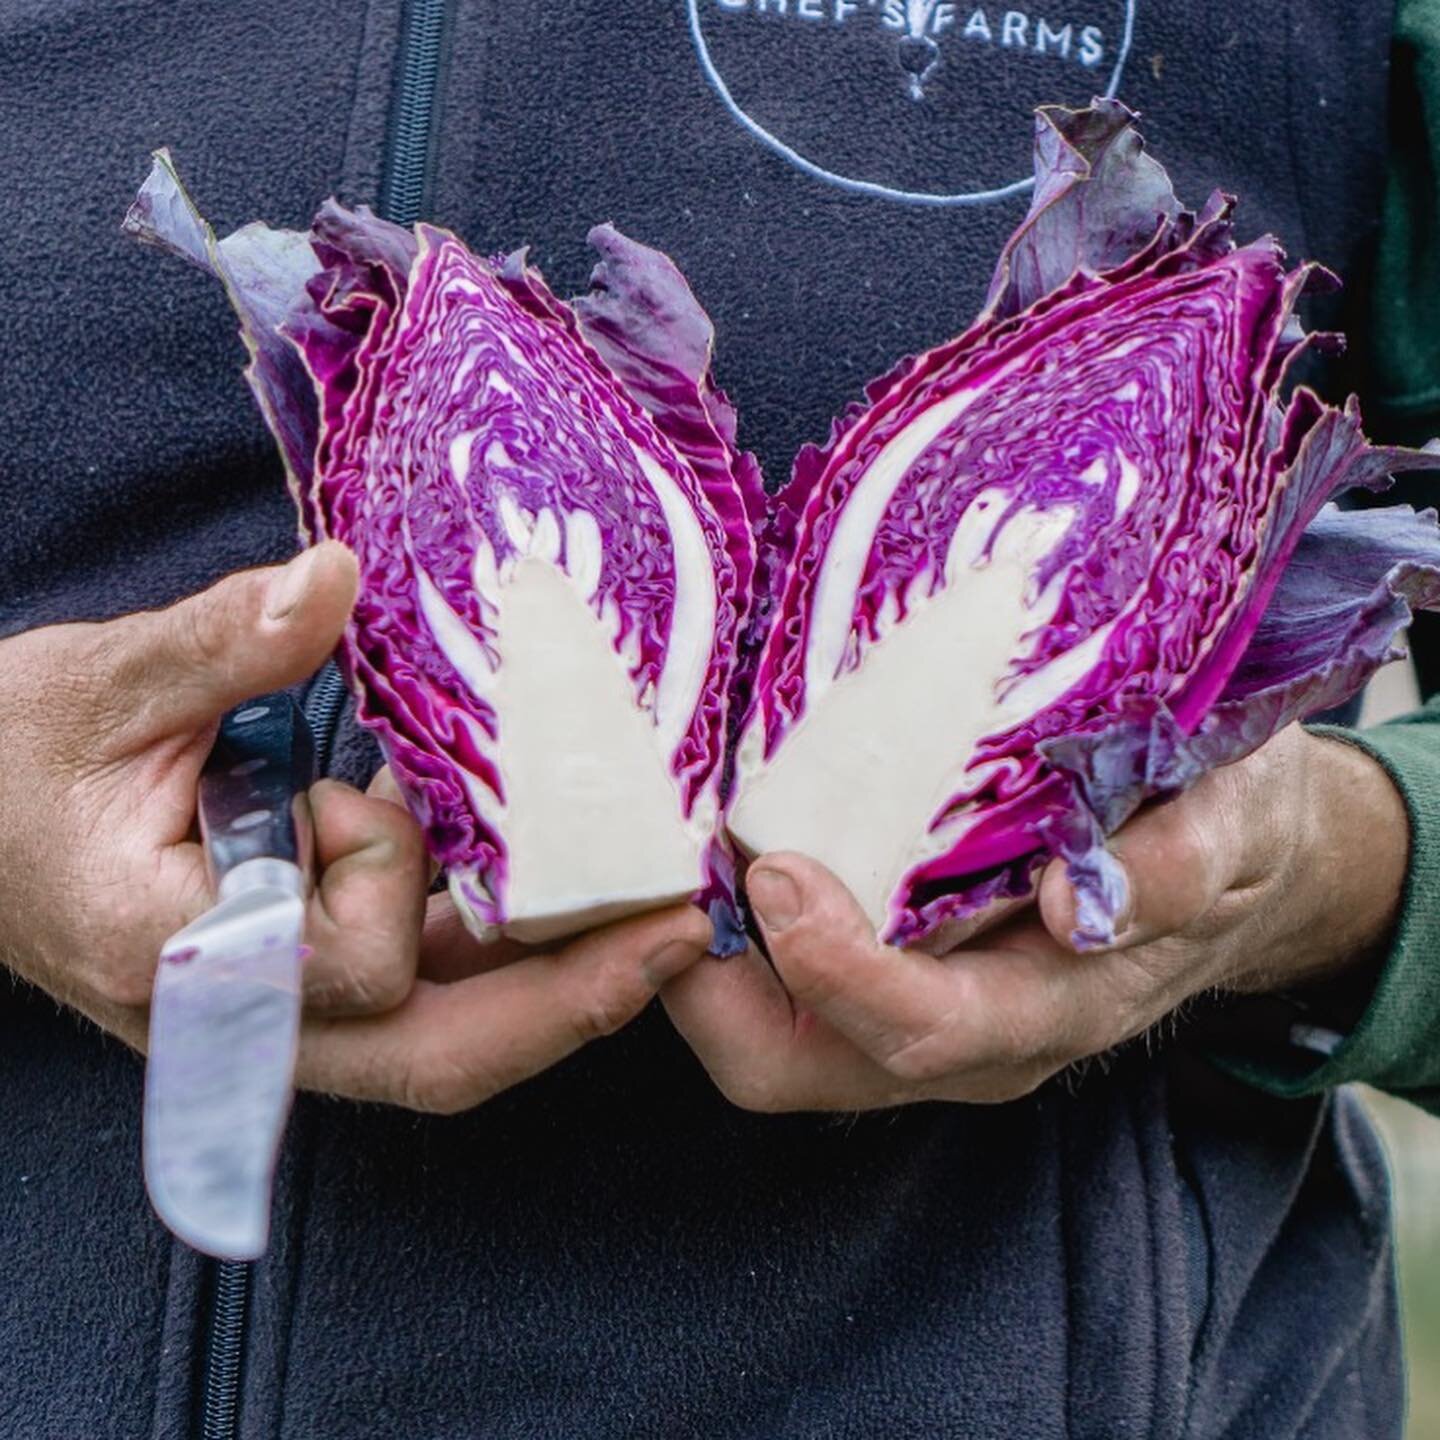 We have so many new product lines starting at the moment! Our red Hispi cabbage is just incredible on the inside! #eatlocal #foodmiles #regenerative #freshproduce #londonfood #broghtonfoodie